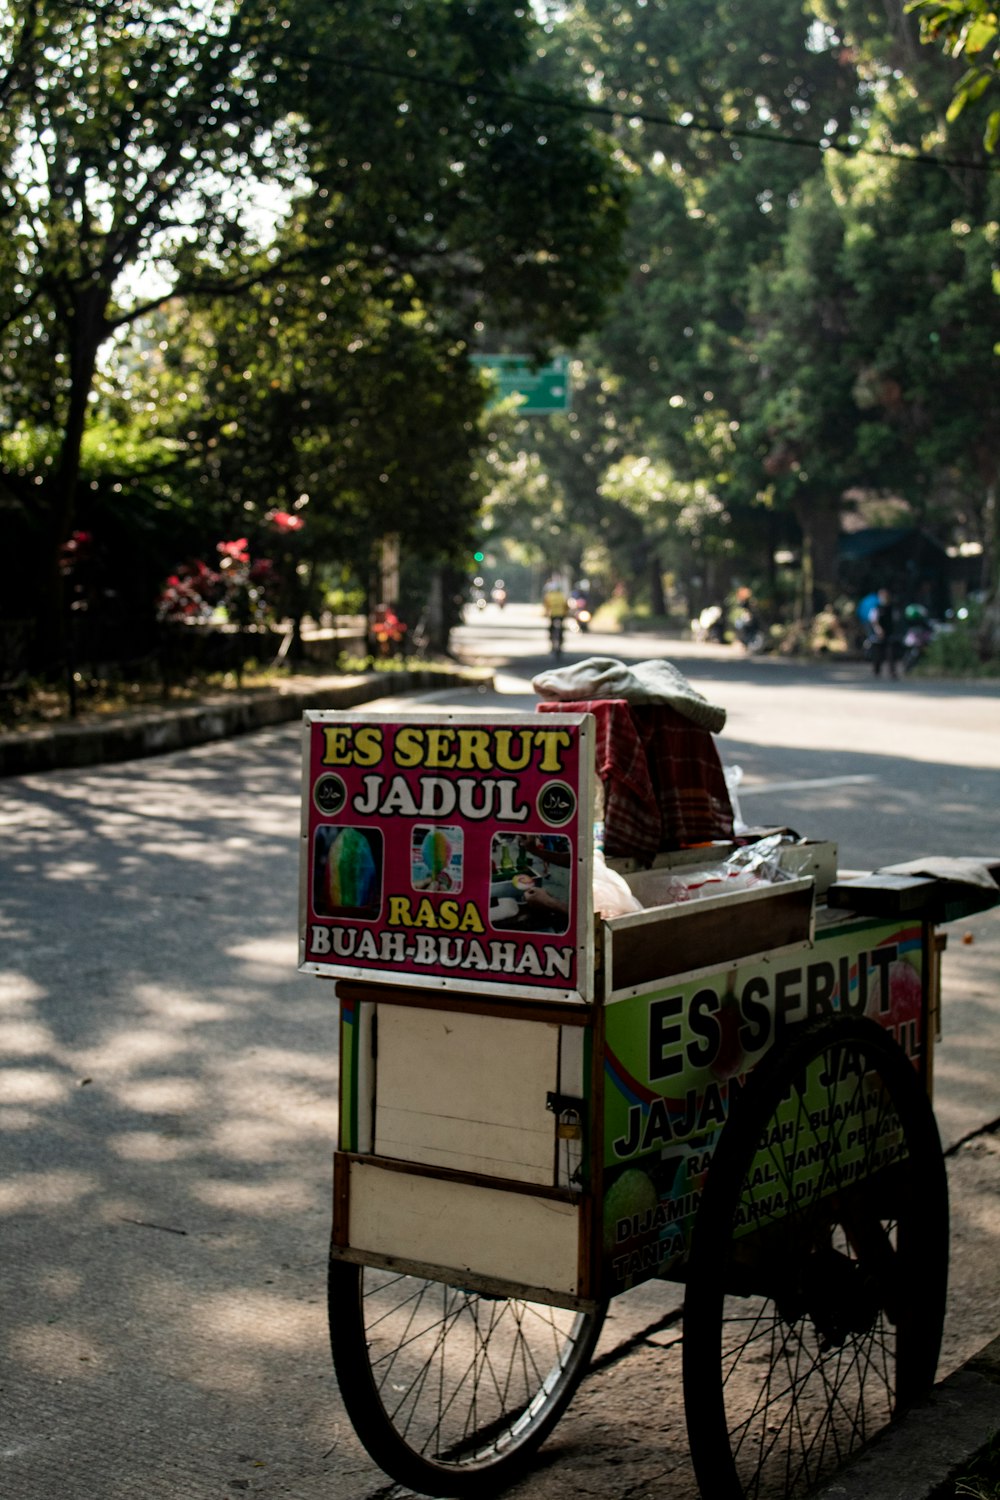 a street vendor cart sitting on the side of the road